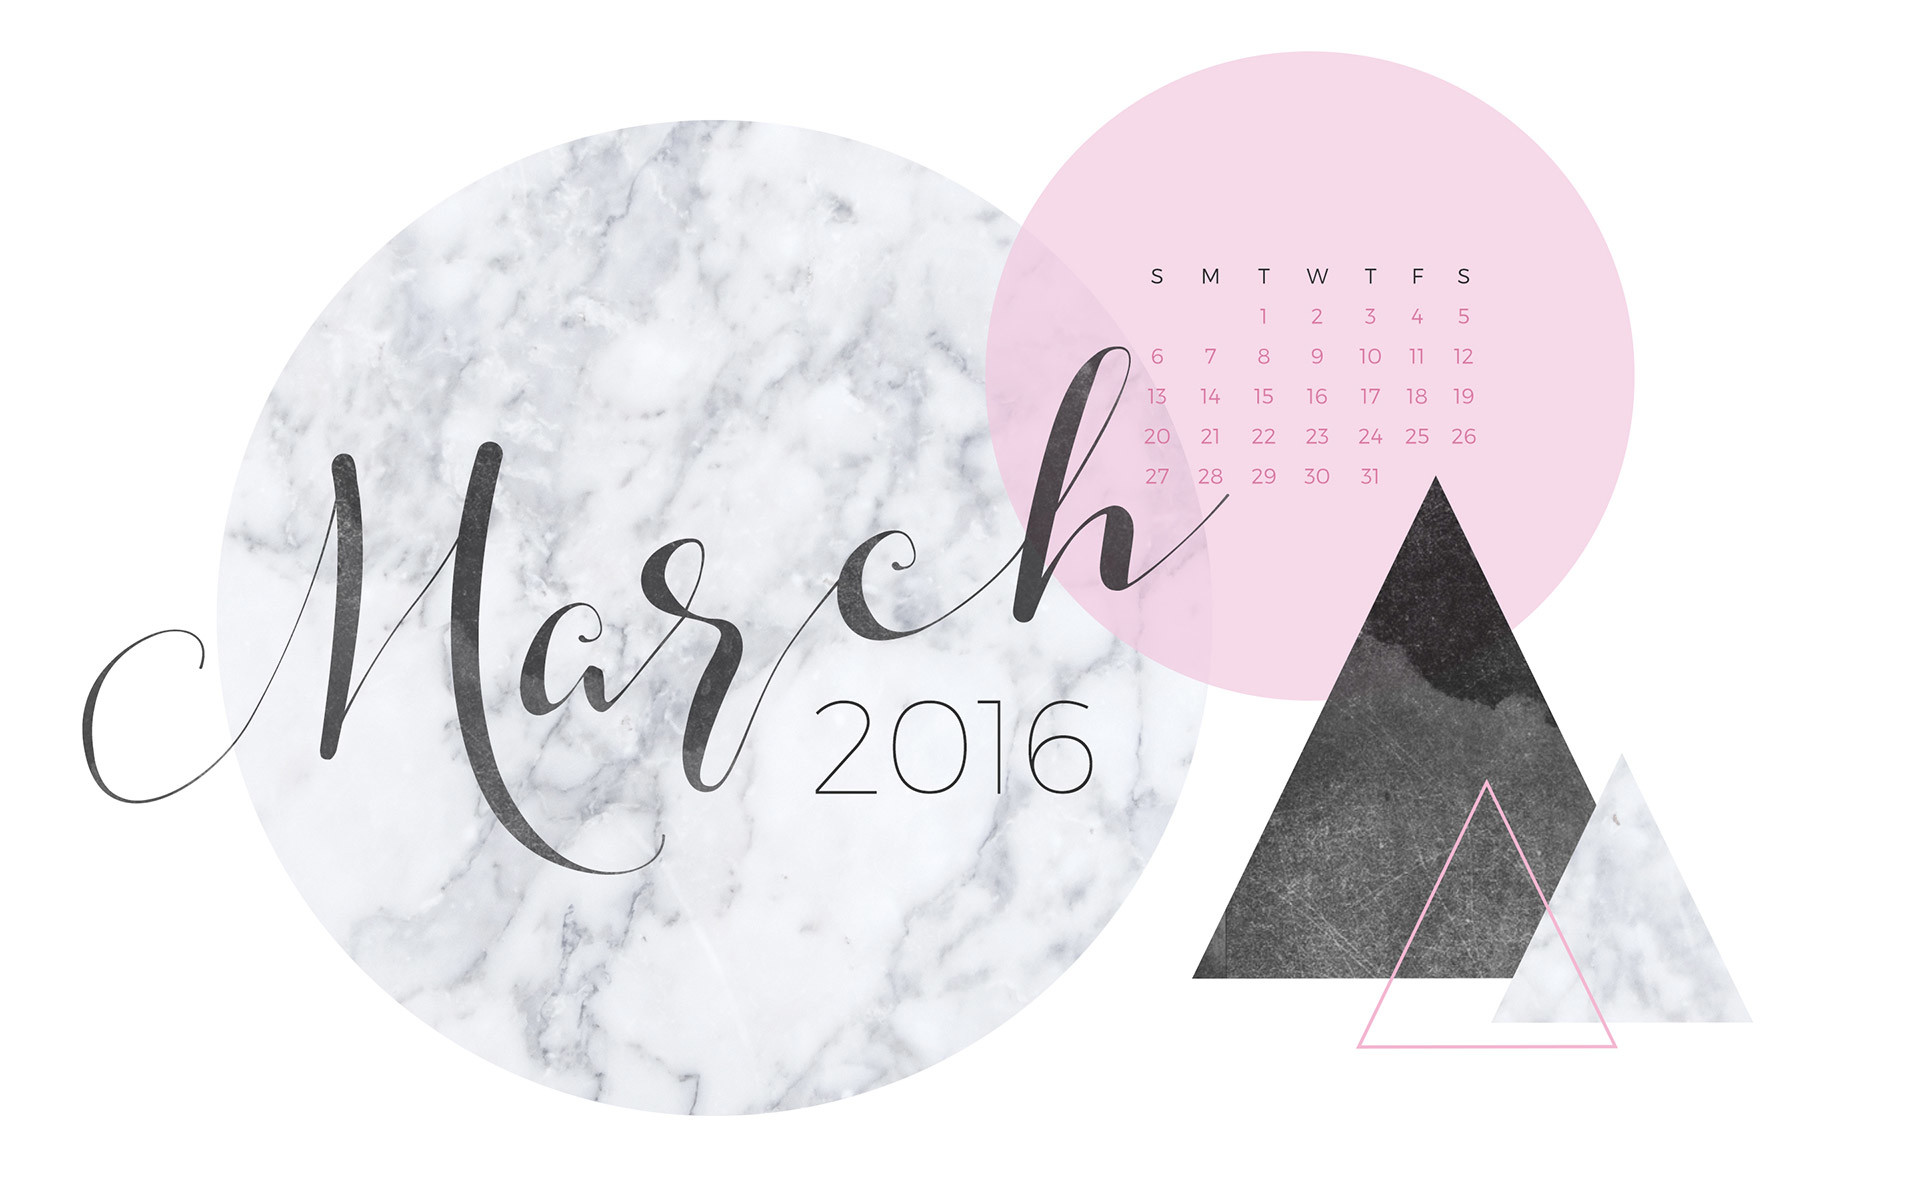 Because Im currently obsessed and want everything to be marble patterned, I figured Calendar WallpaperDesktop